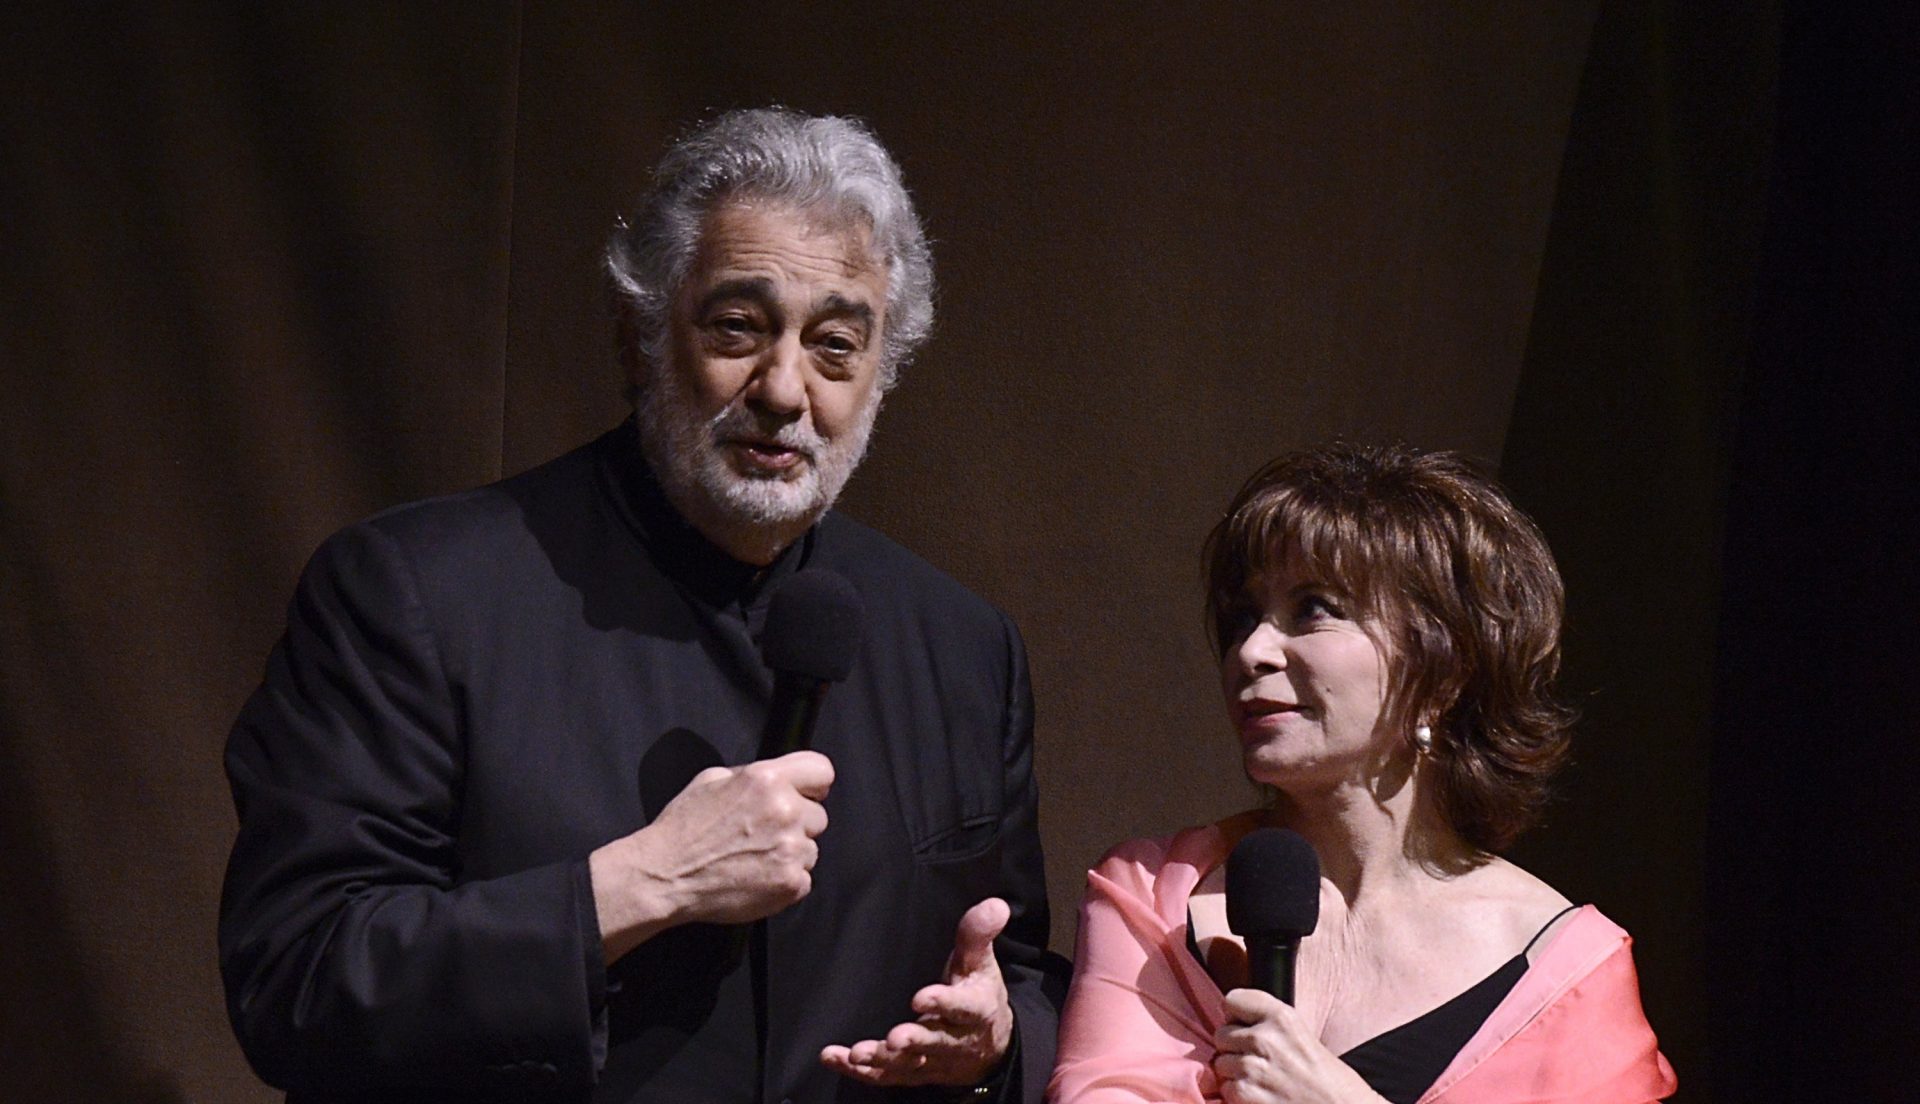 Plácido Domingo pulls out off Metropolitan Opera performances - Here's what happened